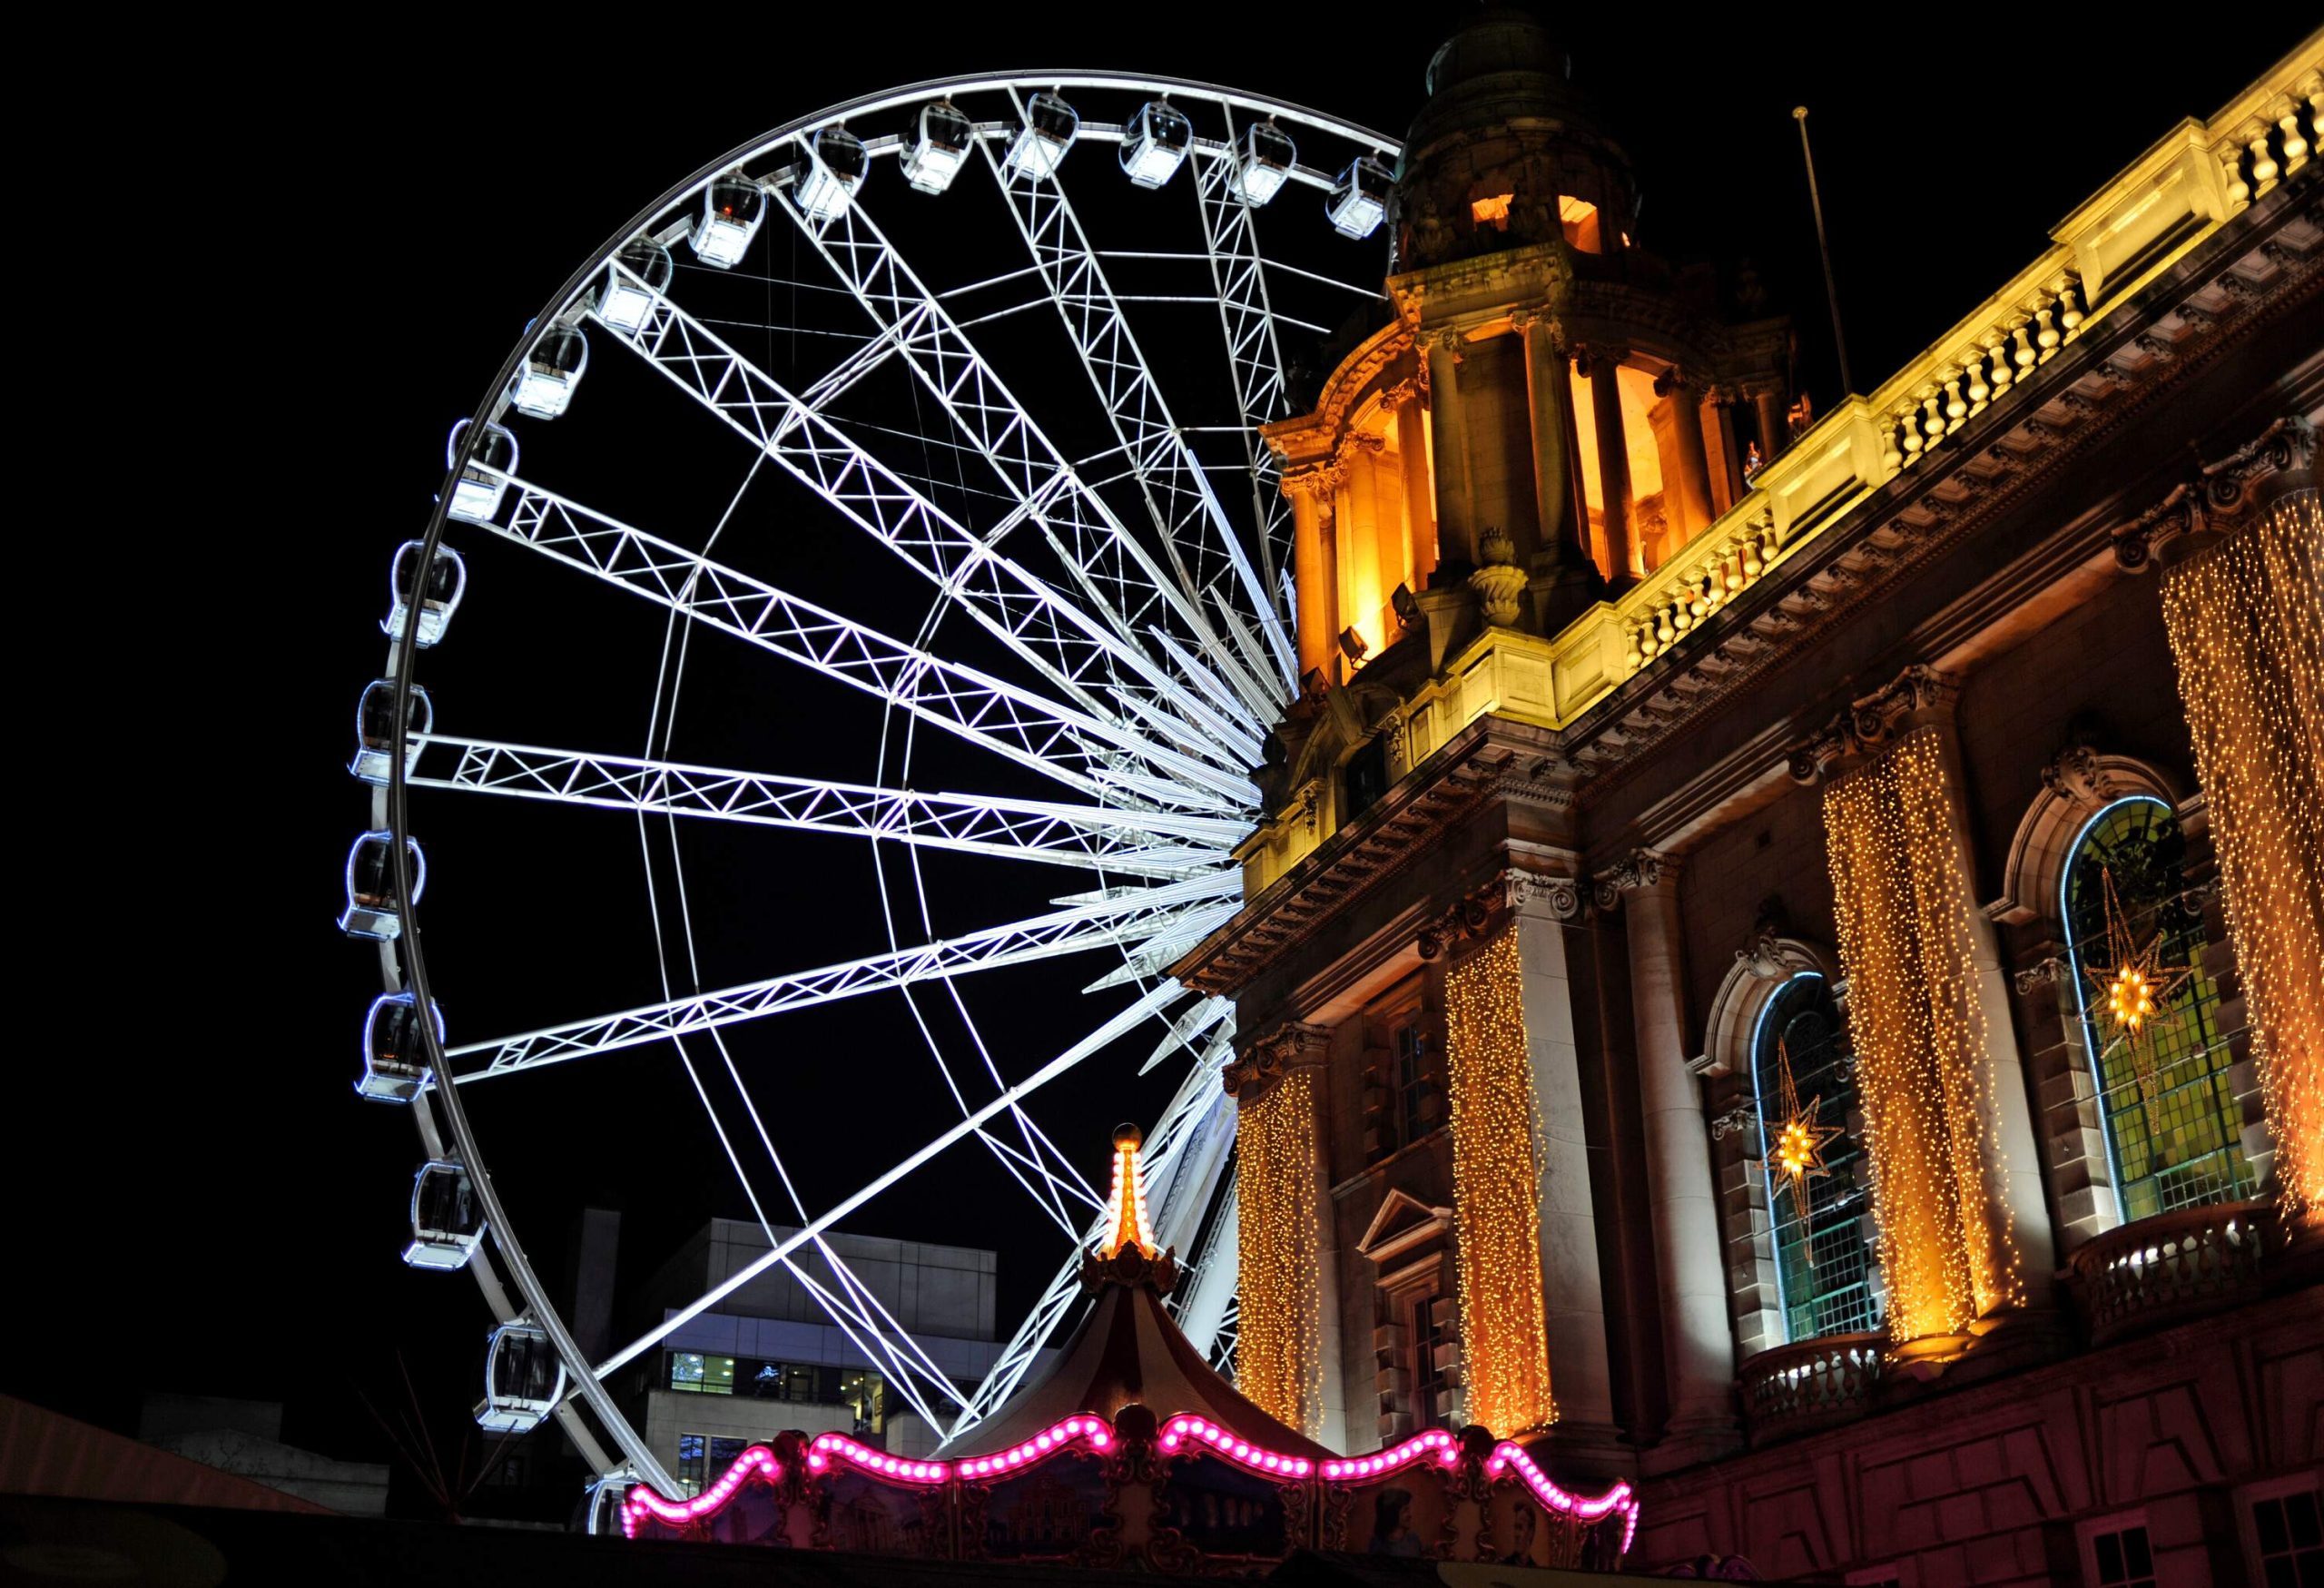 The Big Wheel at Belfast City Hall at night. The Big Wheel is a temporary feature in Belfast city centre and will be due for relocation at some point.